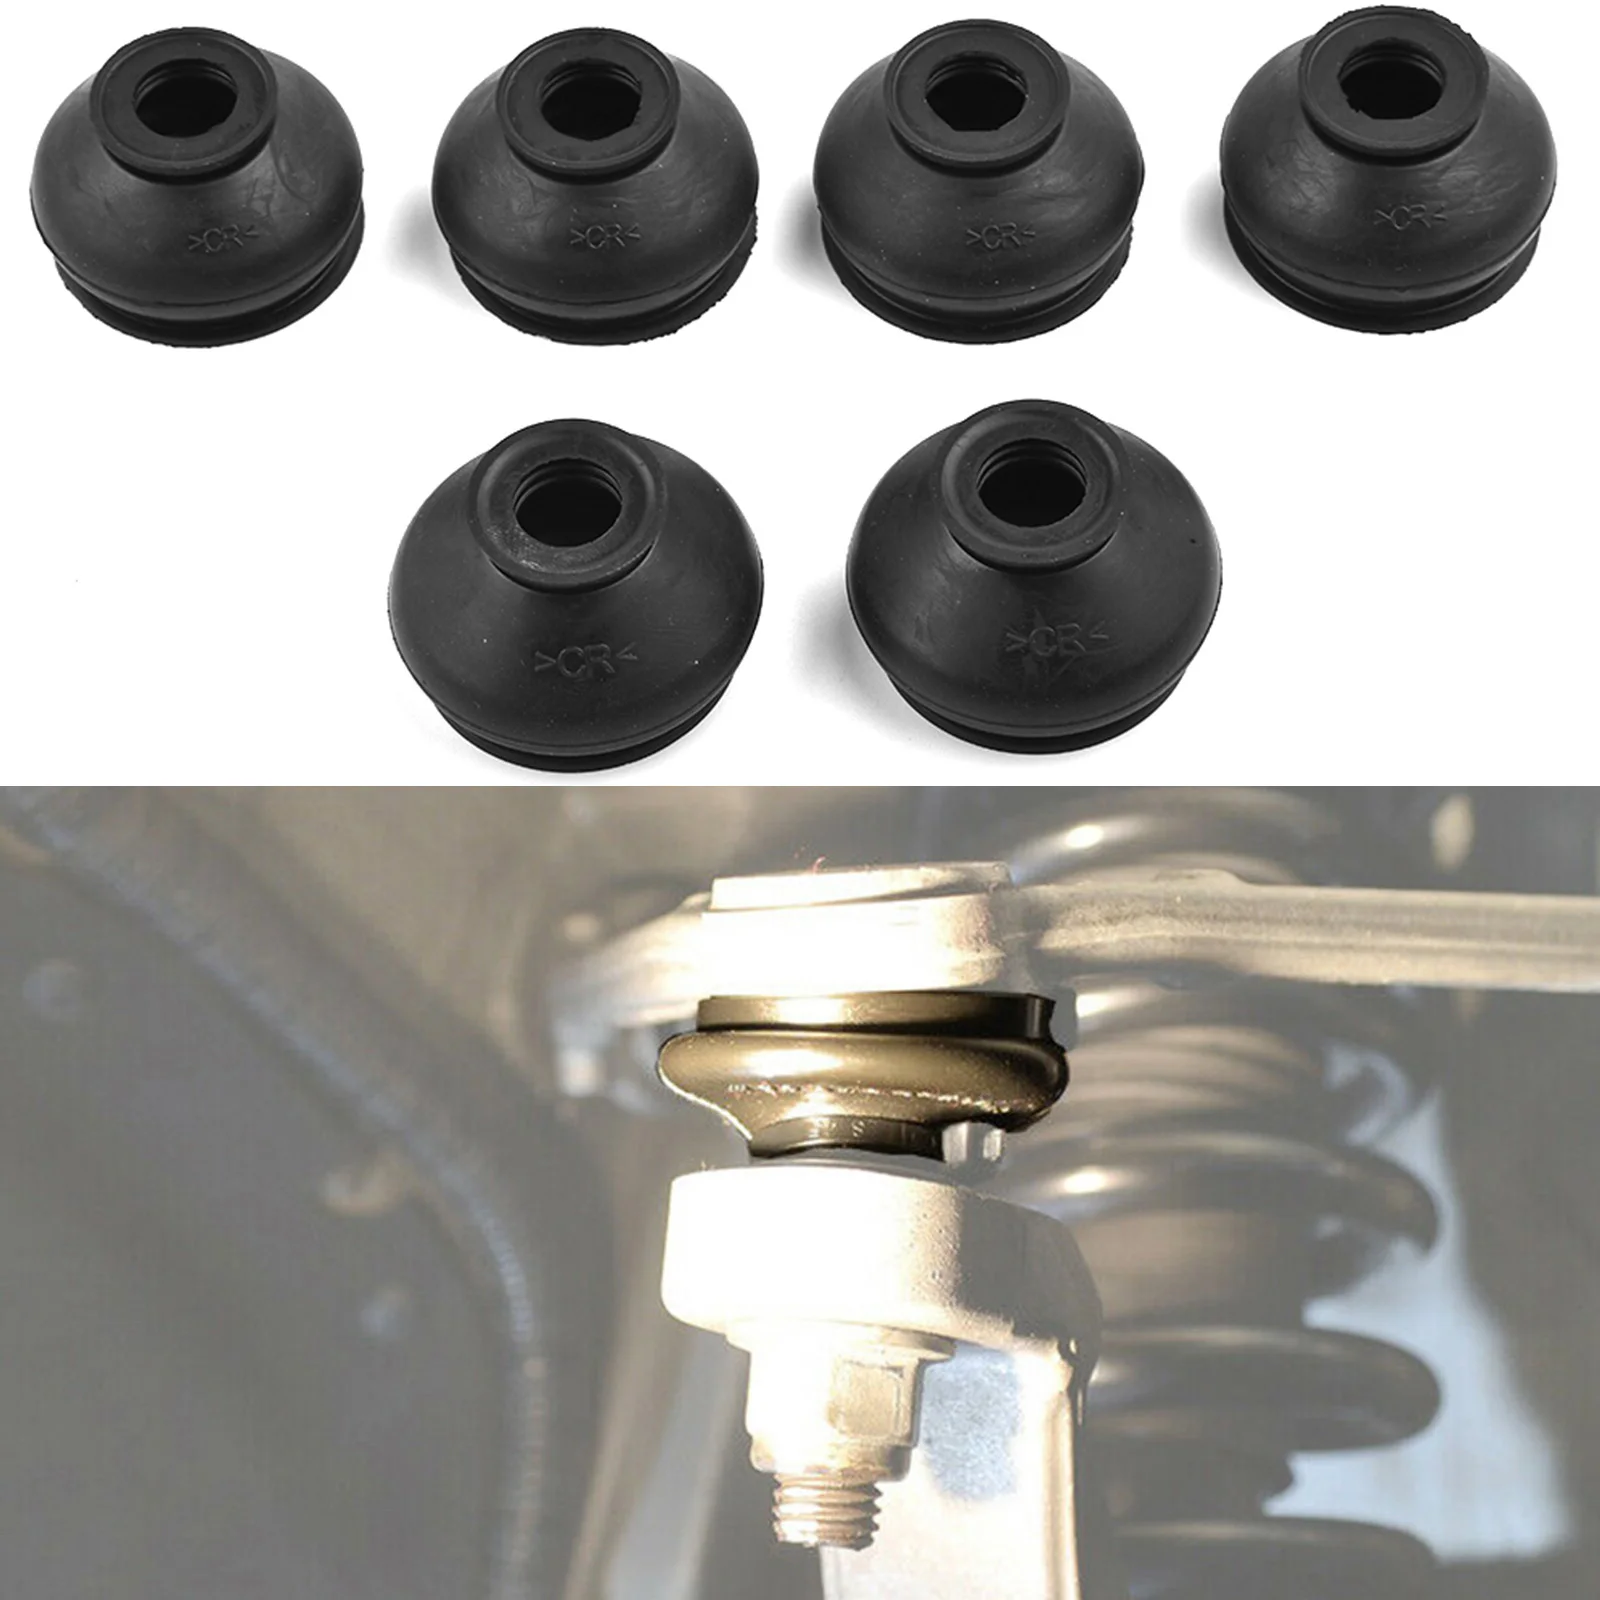 Car Dust Boot Covers Accessories Ball Joint Universal Vehicle 6 Pcs/set Decor Gaiters Parts Replacement Rubber